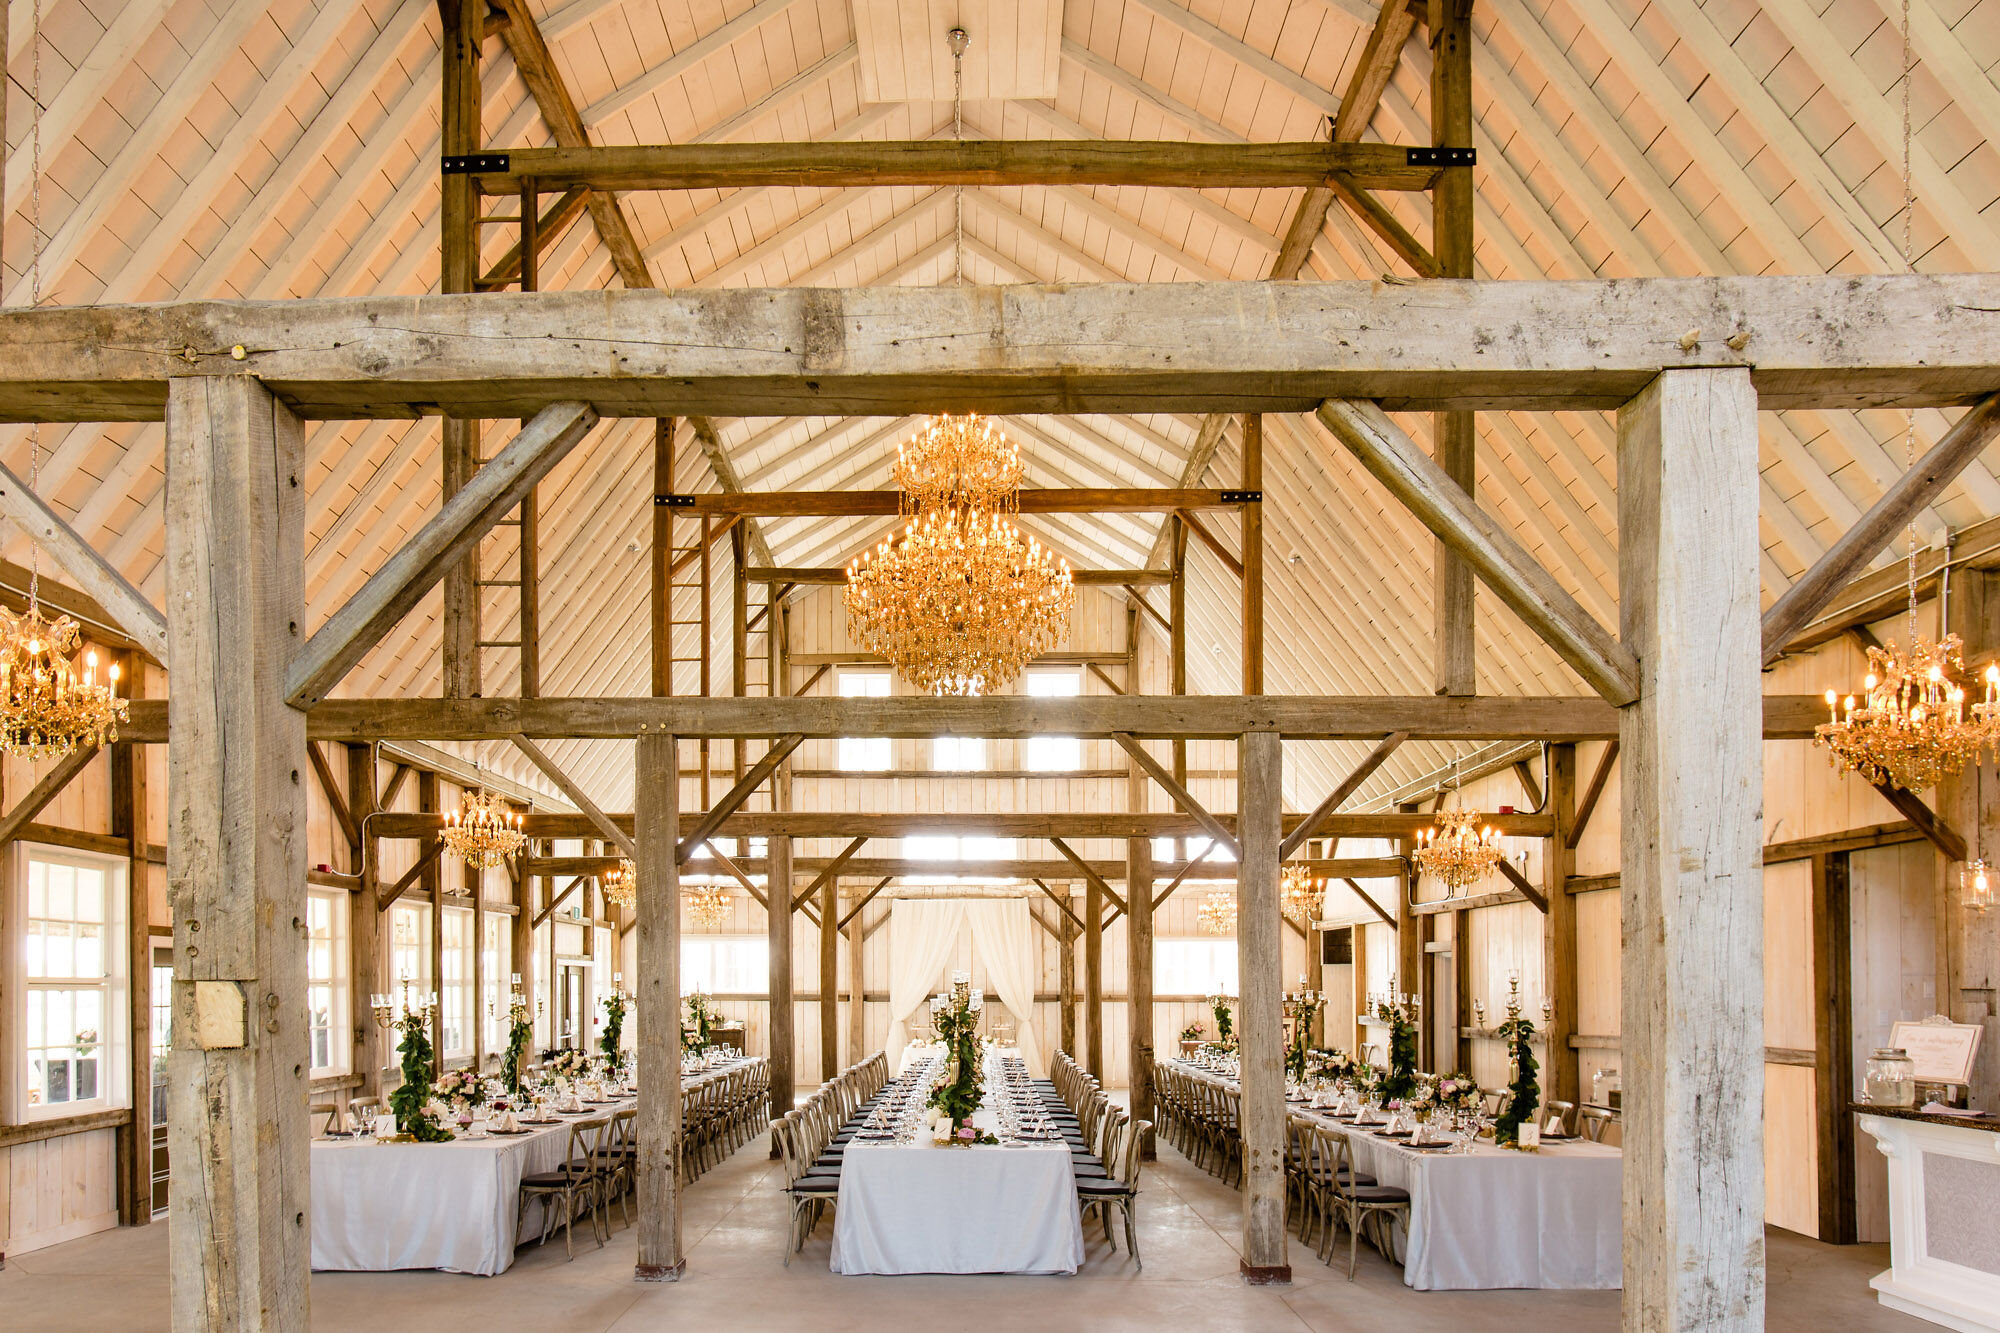 Photograph of French country-inspired barn decorated for a wedding reception at Stonefields Estate near Ottawa